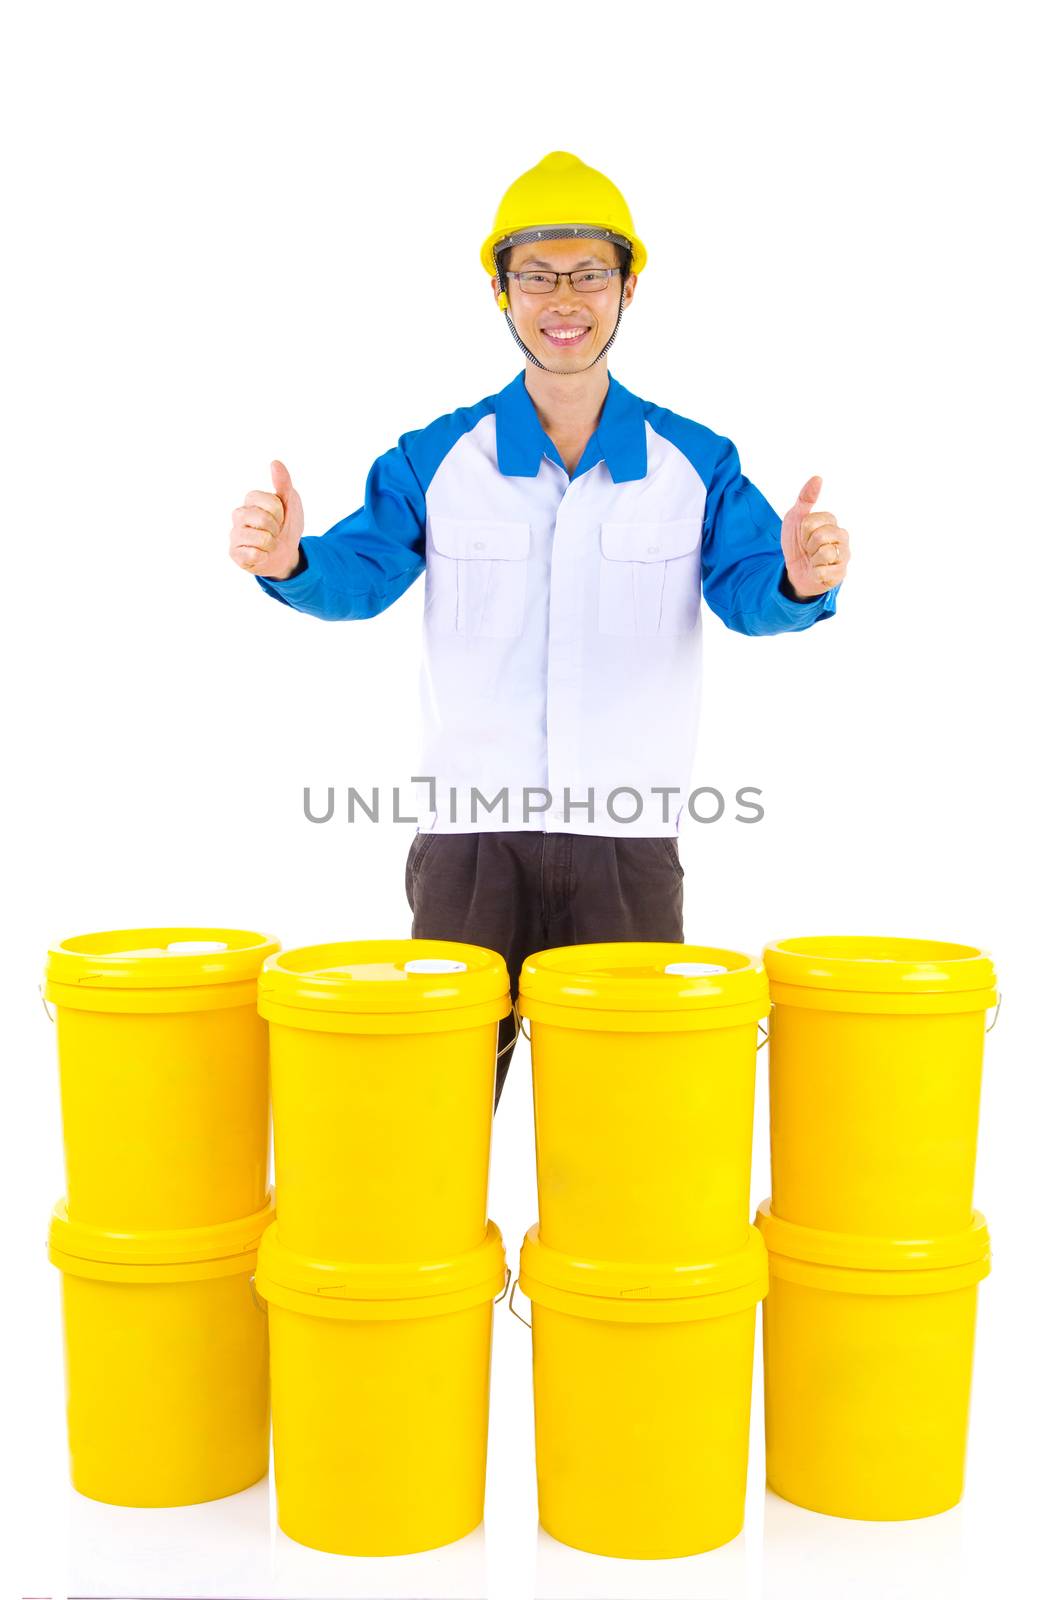 Lubricant oils and greases distributor with suit hardhat showing thumb-up, isolated on white background.